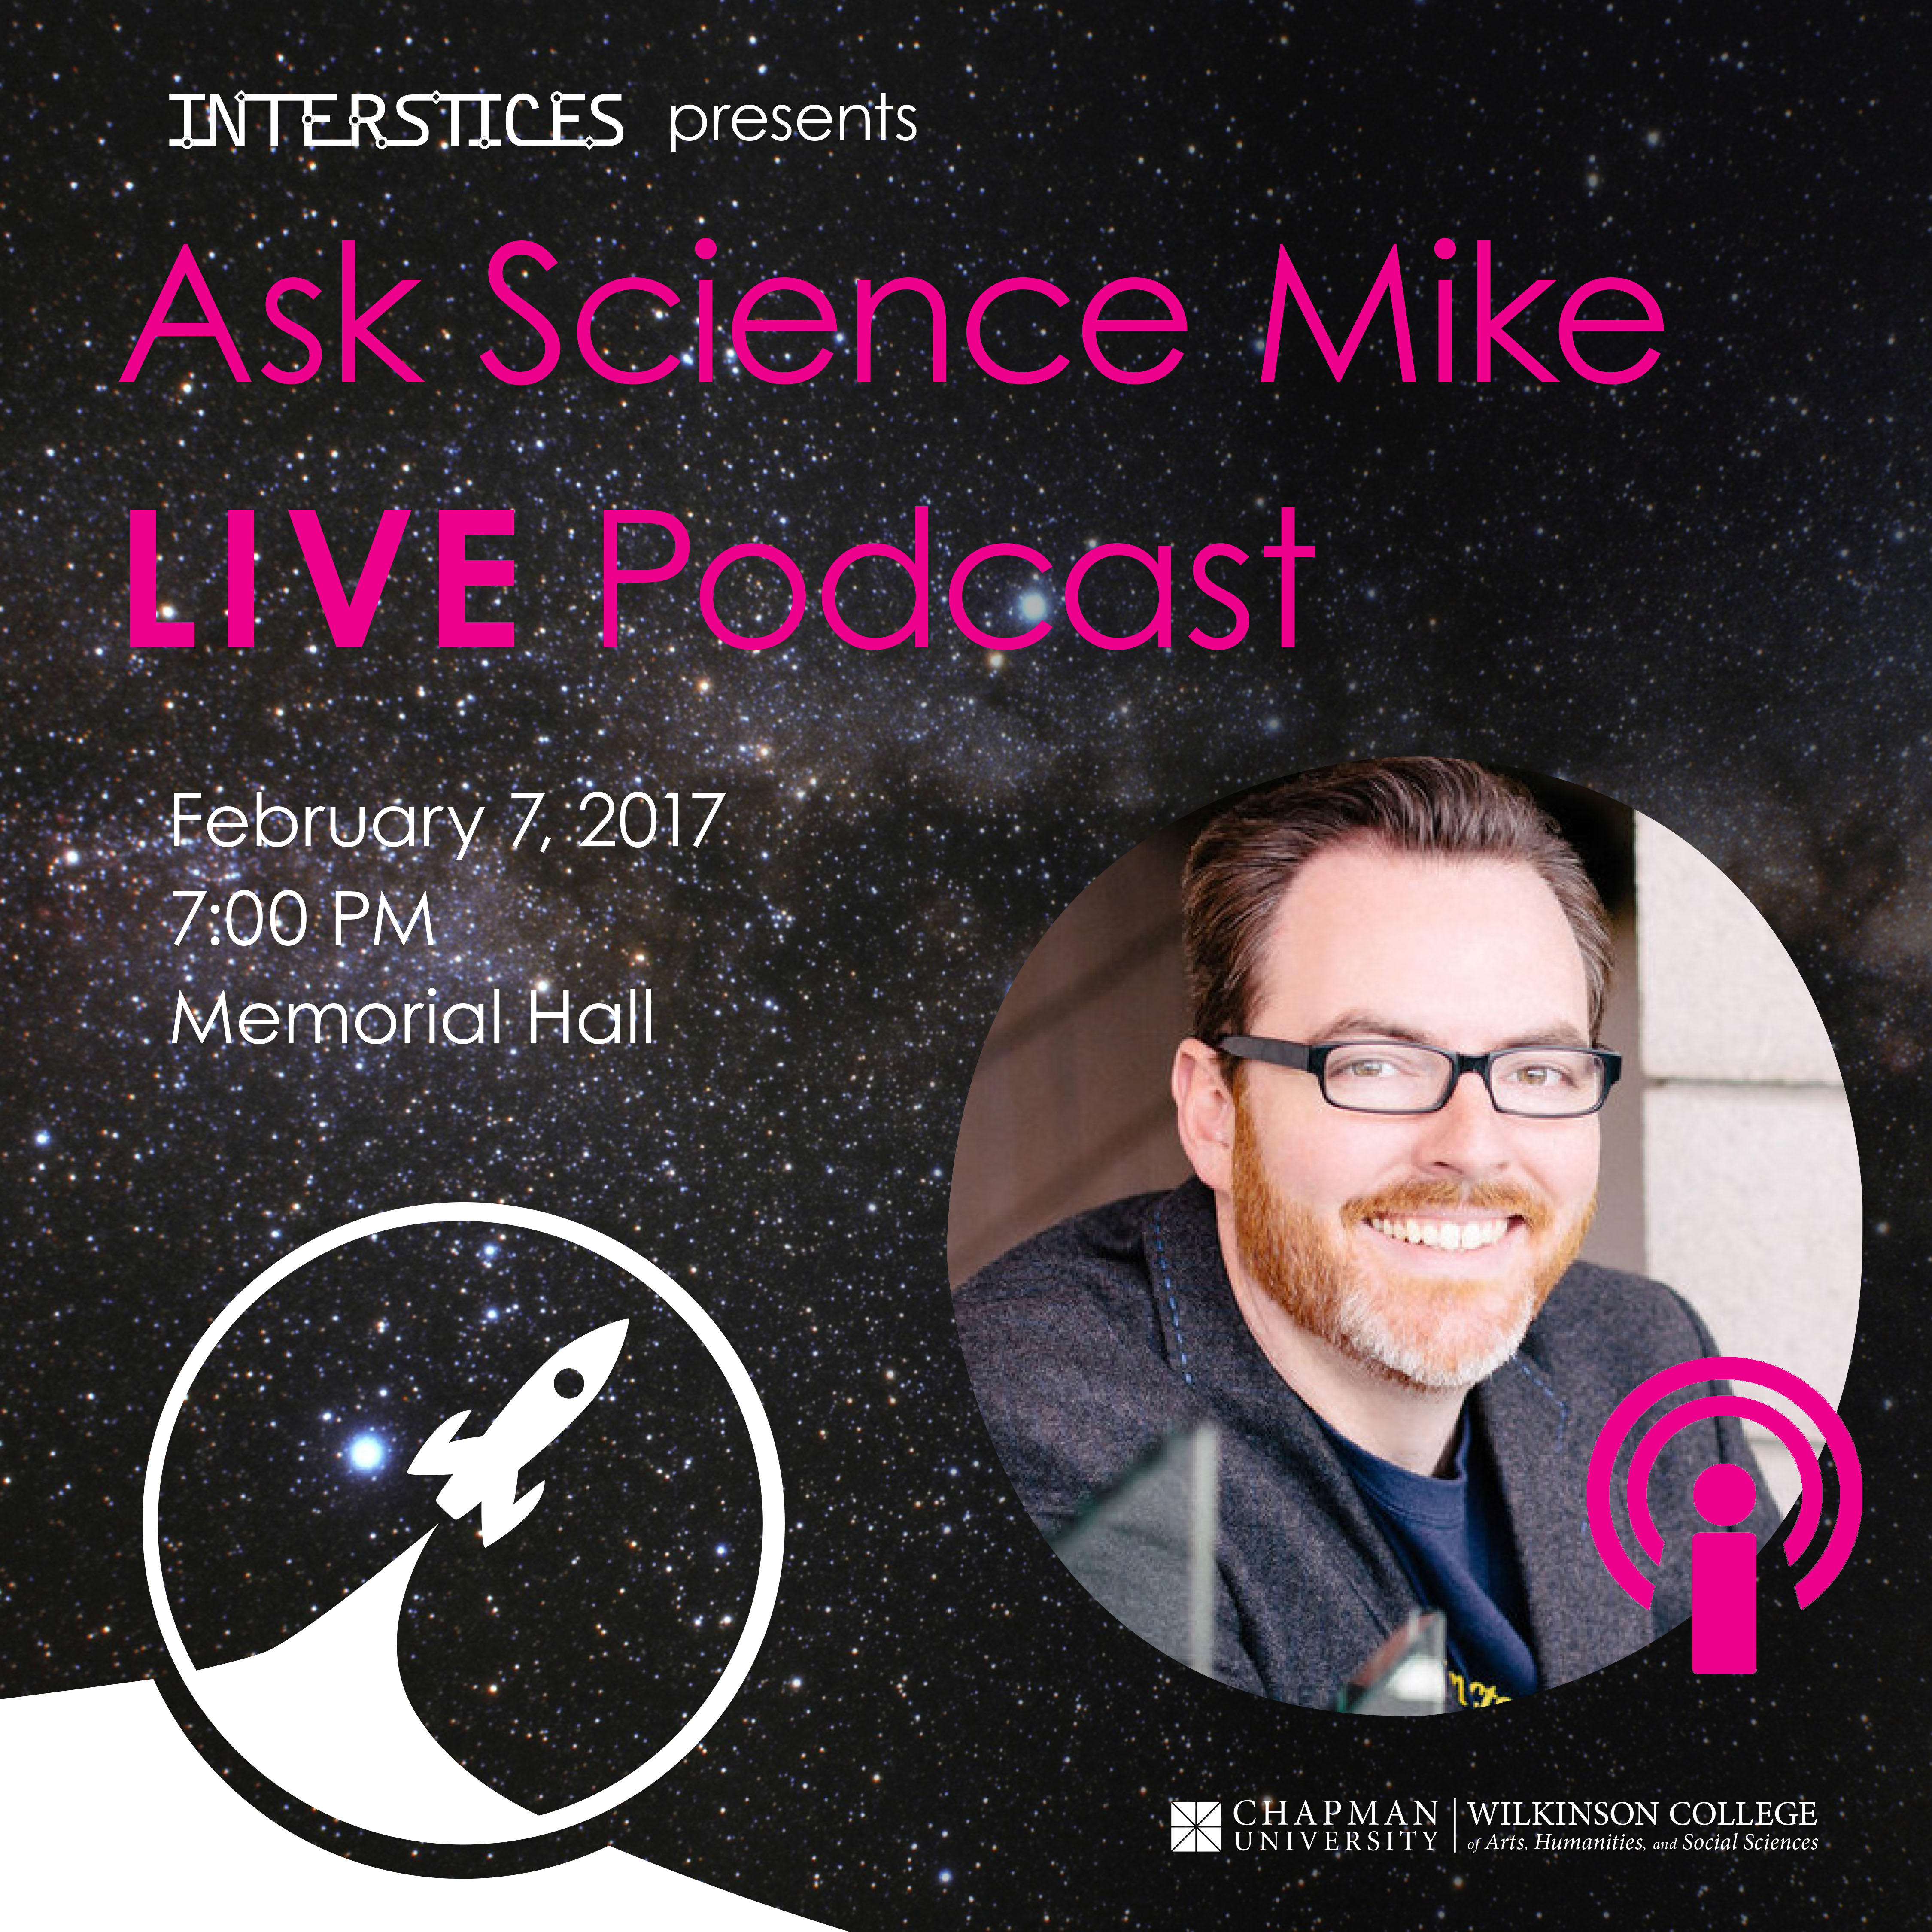 Ask Science Mike LIVE Podcast at Chapman University